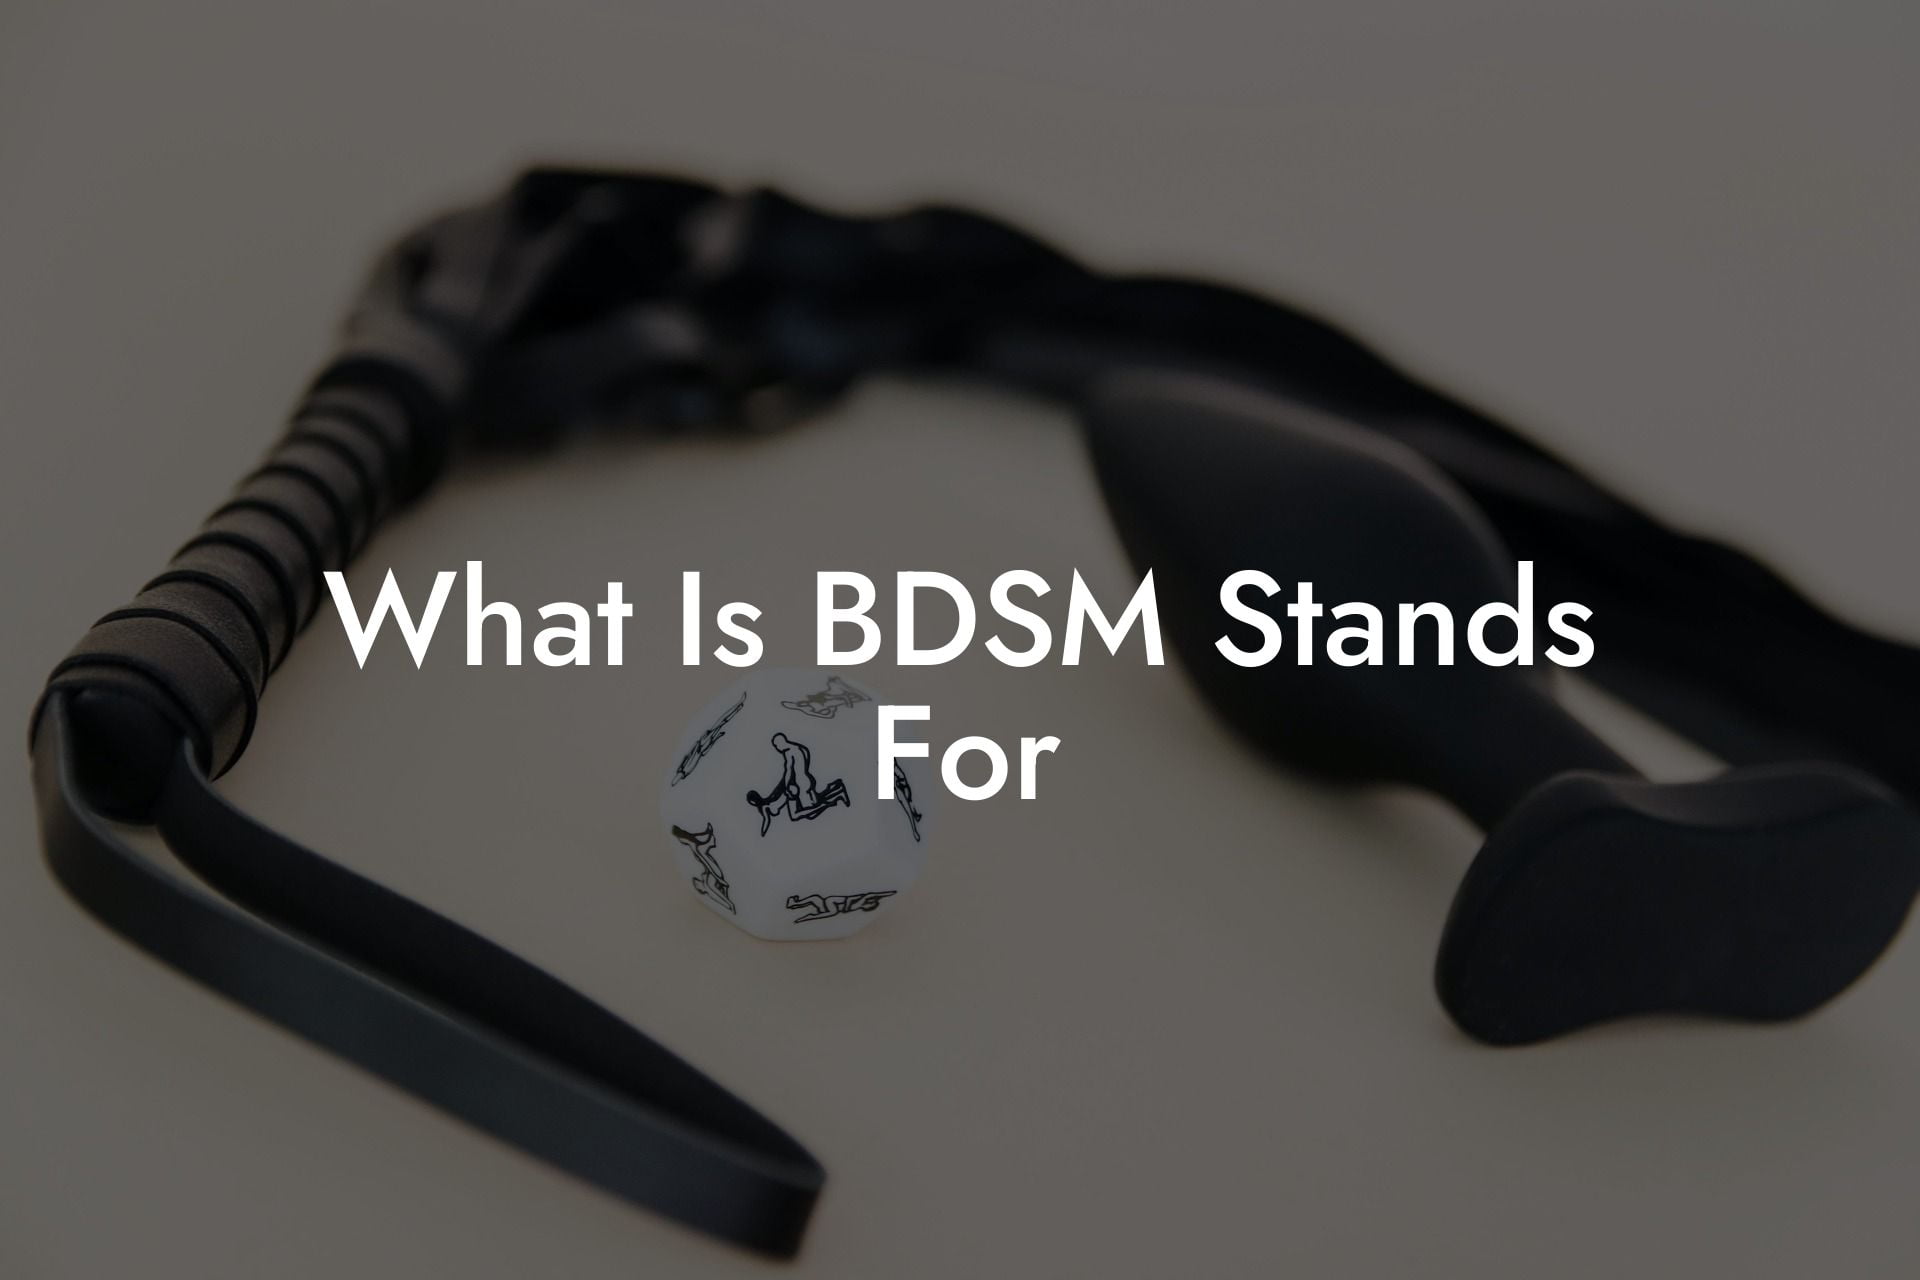 What Is BDSM Stands For